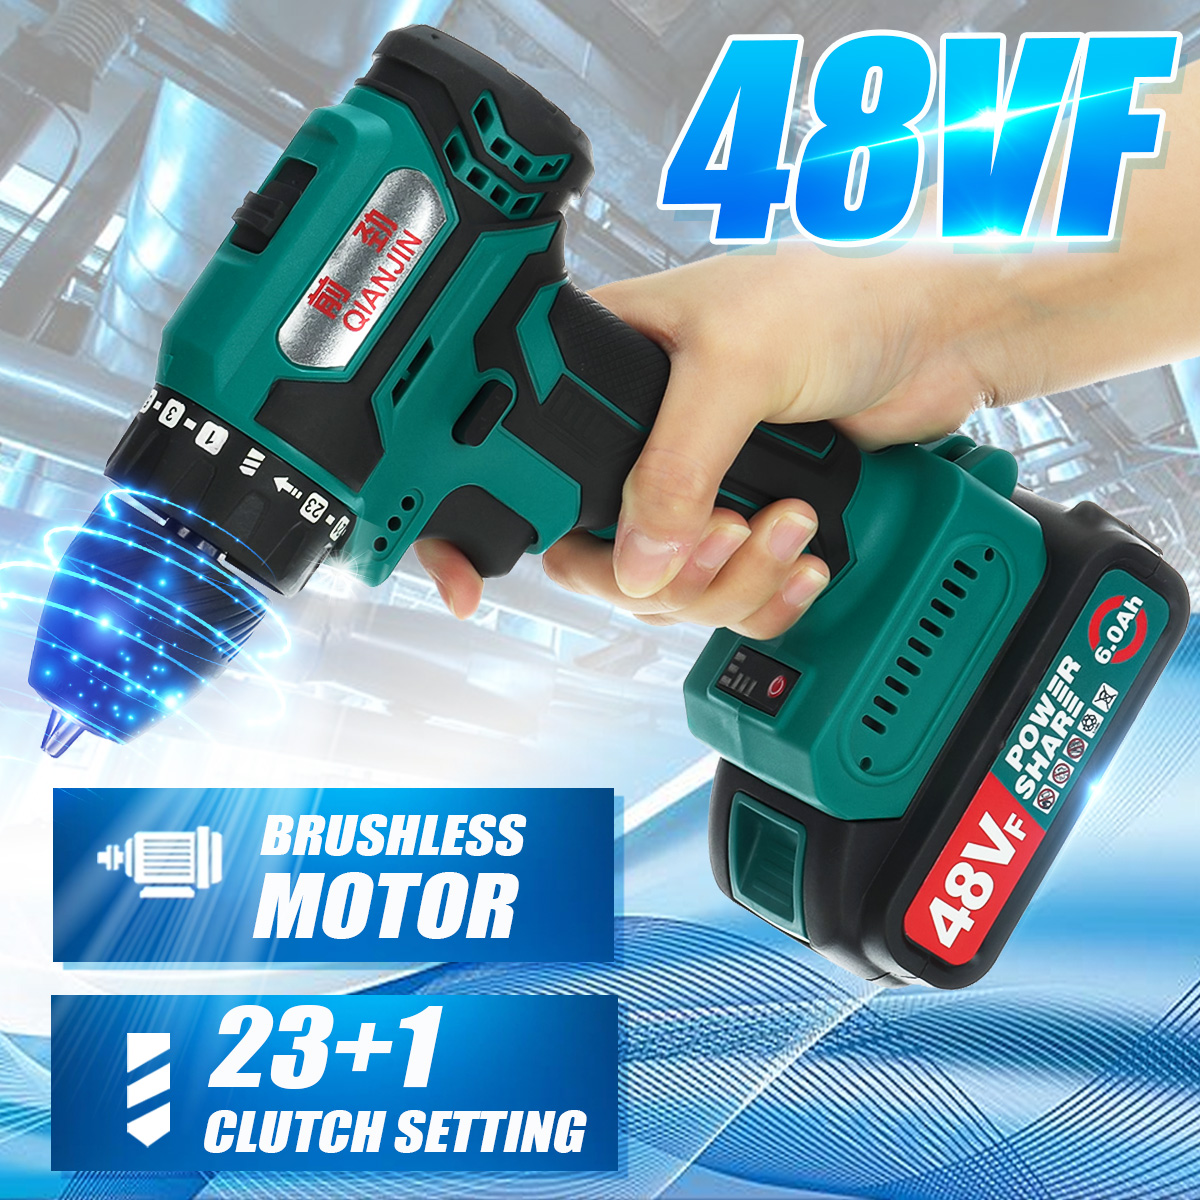 48VF-Brushless-High-Power-Torque-Drill-2-Speed-Rechargable-Electric-Screwdriver-Drill-With-None12-Pc-1840212-1